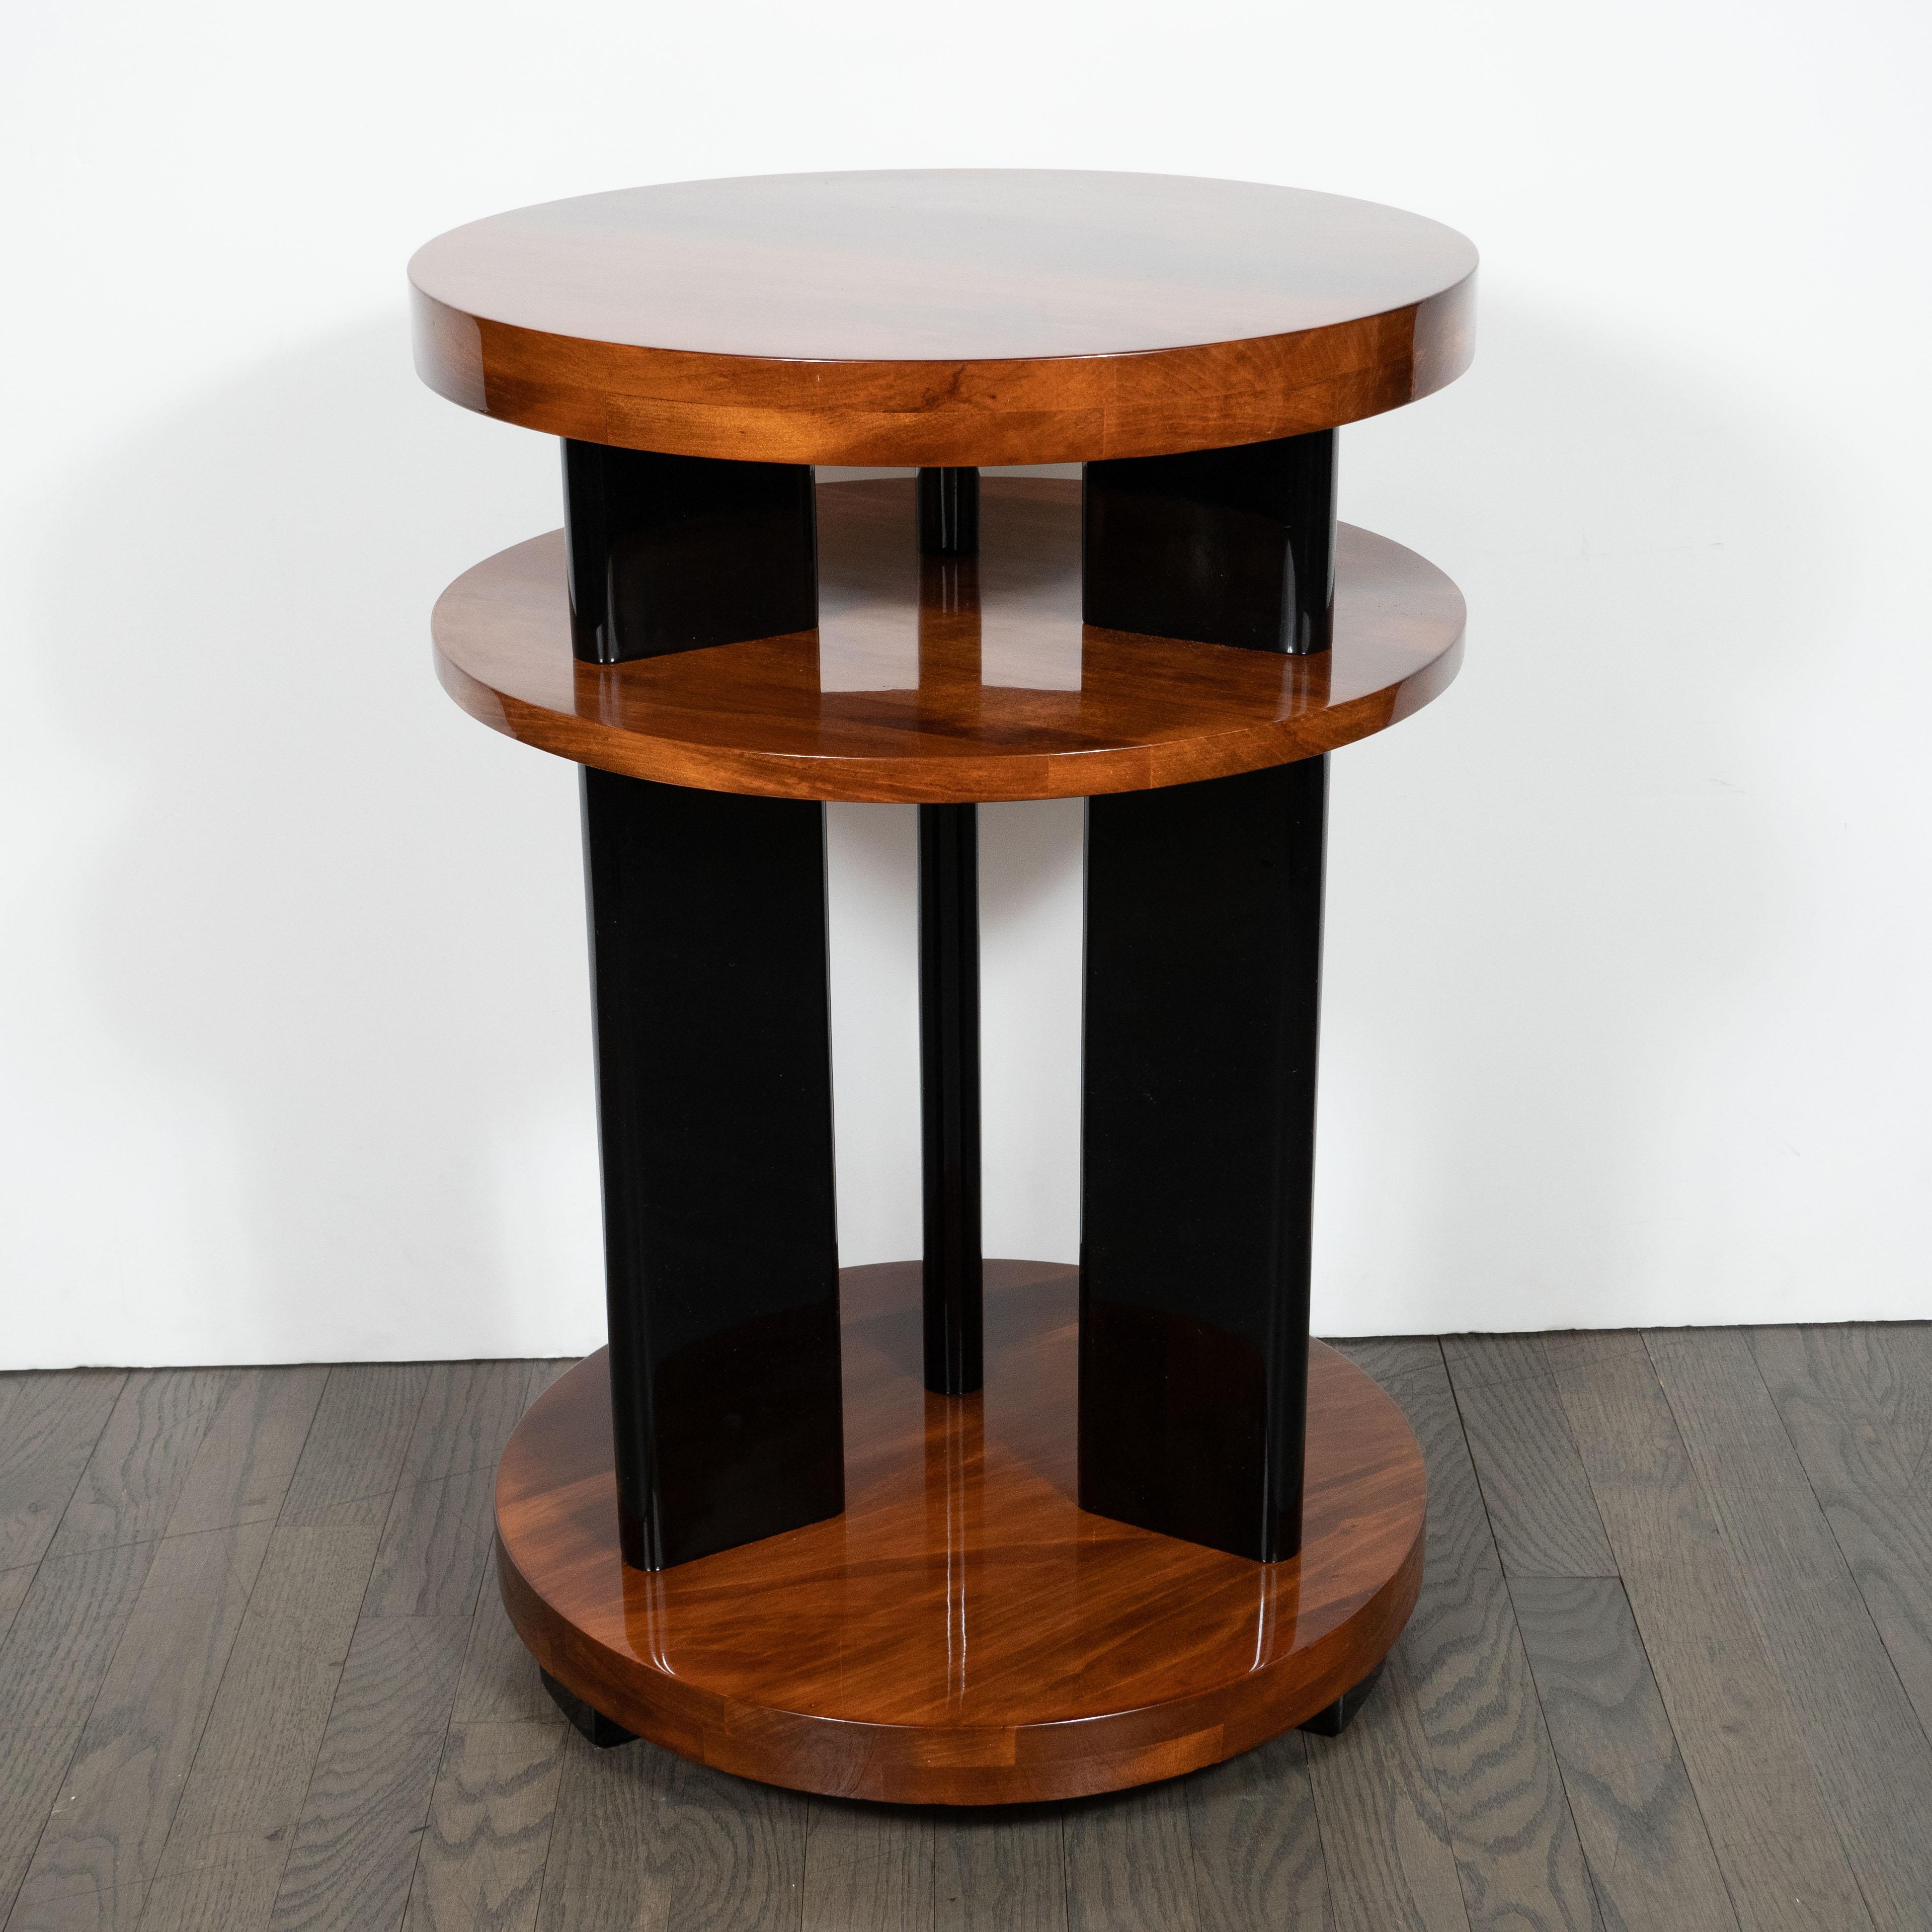 This elegant Art Deco Machine Age side table was realized in the United States, circa 1935. It features three circular tiers in bookmatched walnut connected by three streamlined rectangular supports in black lacquer that appear to pierce the centre